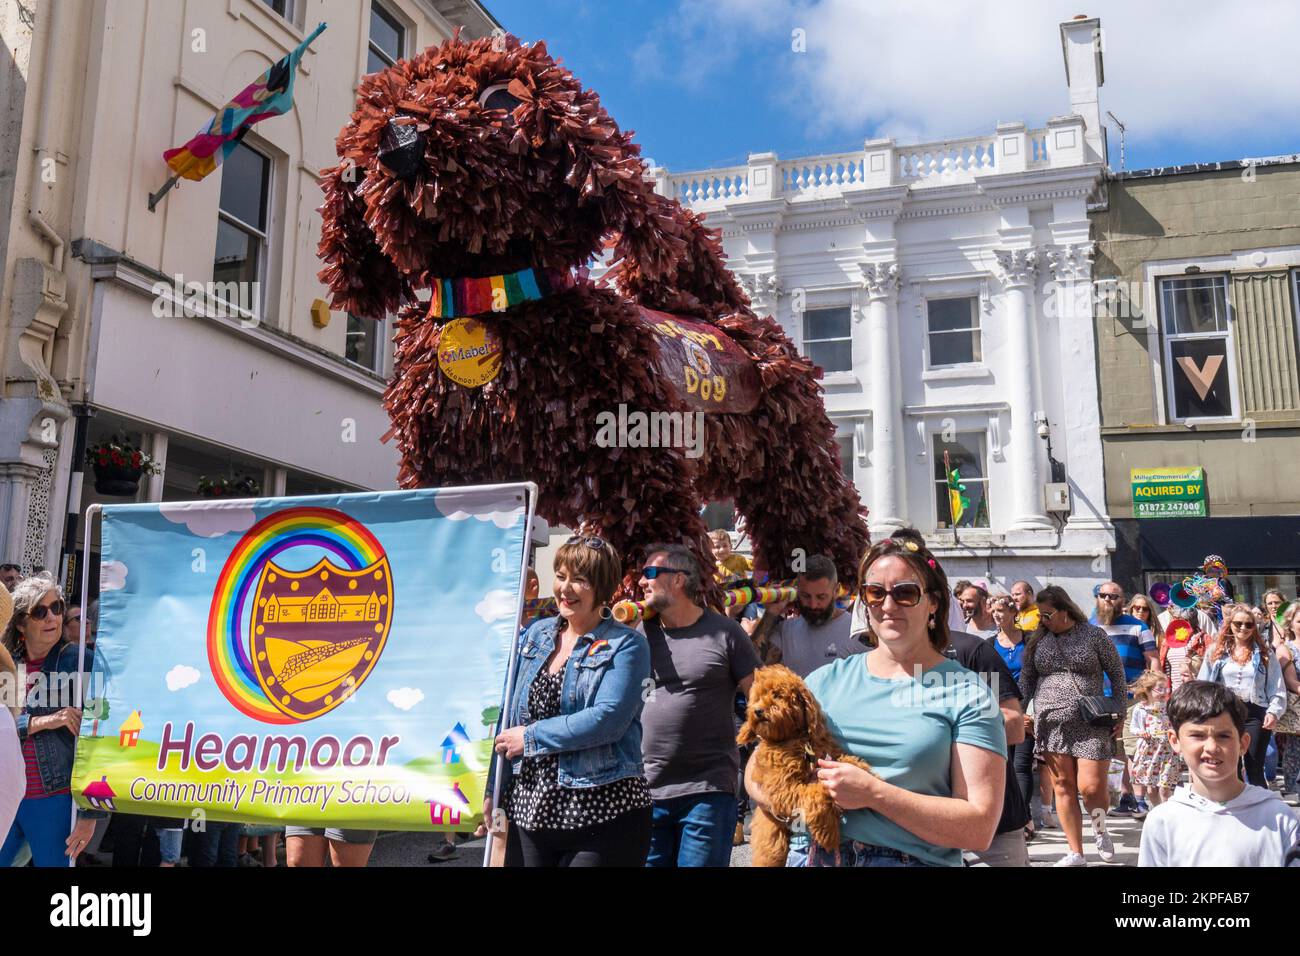 Adults and children from Heamoor Community Primary School parading with their huge sculpture of Mabel a therapy dog through Penzance Cornwall Stock Photo